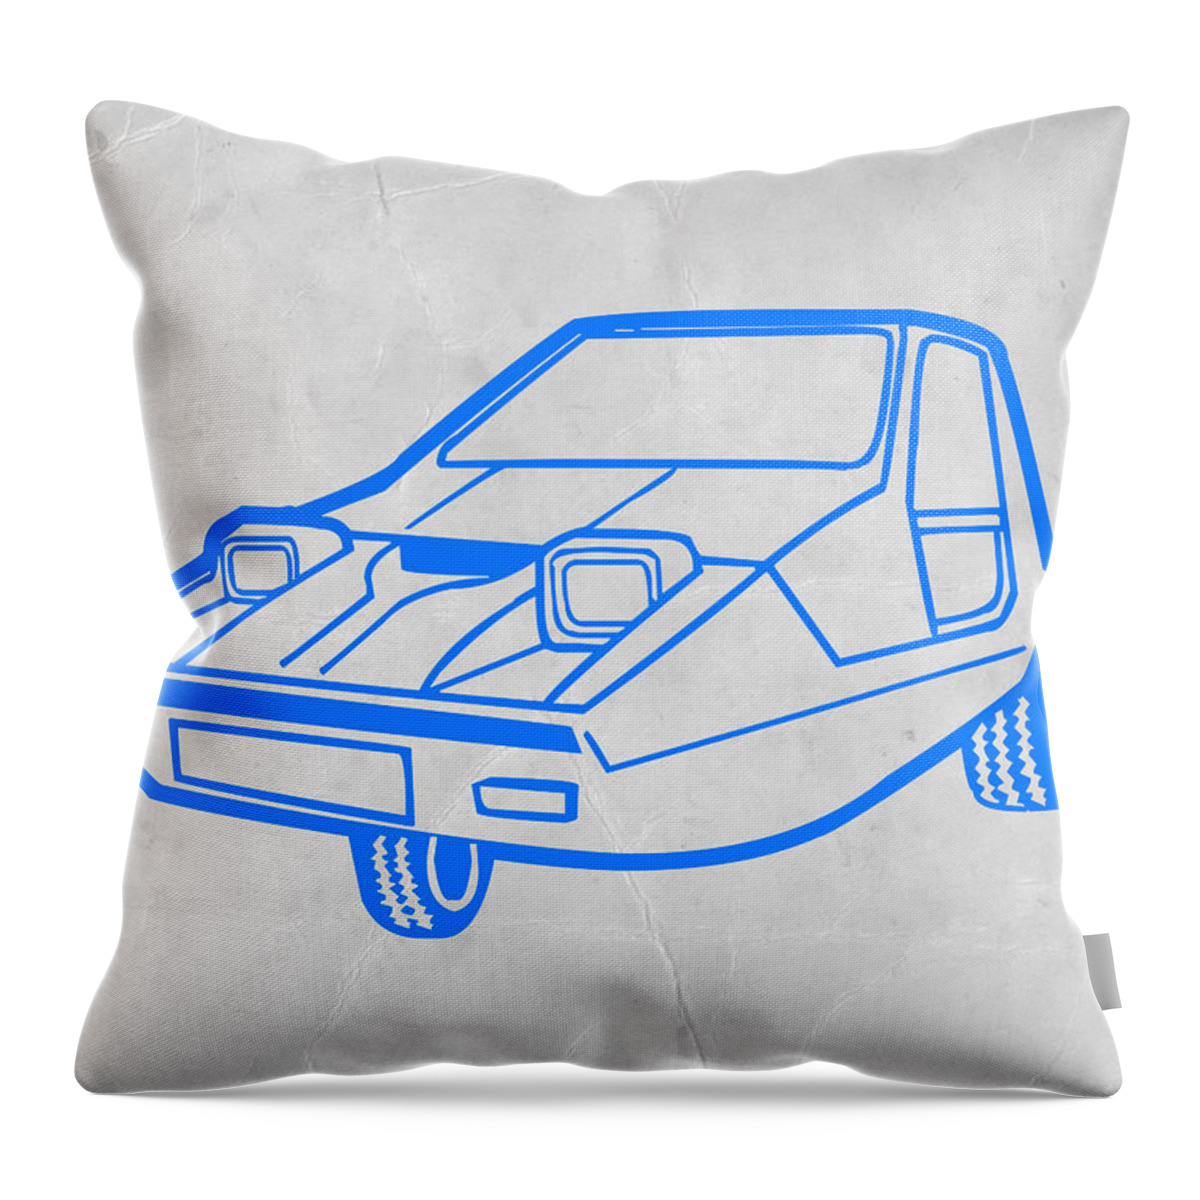 Auto Throw Pillow featuring the digital art Funny car by Naxart Studio